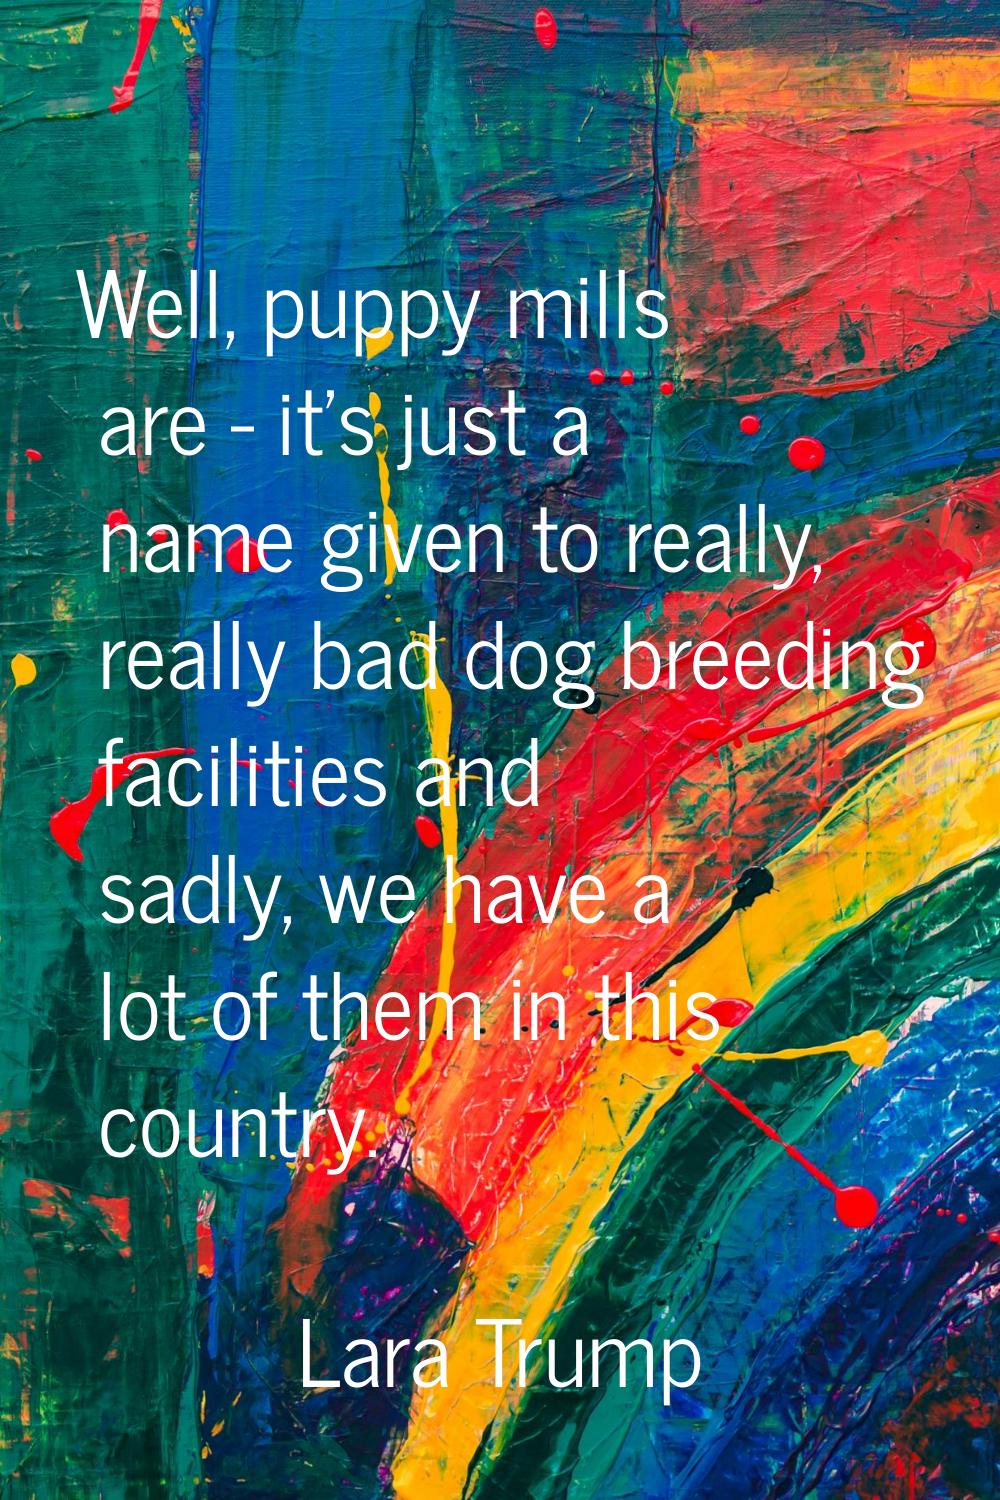 Well, puppy mills are - it's just a name given to really, really bad dog breeding facilities and sa